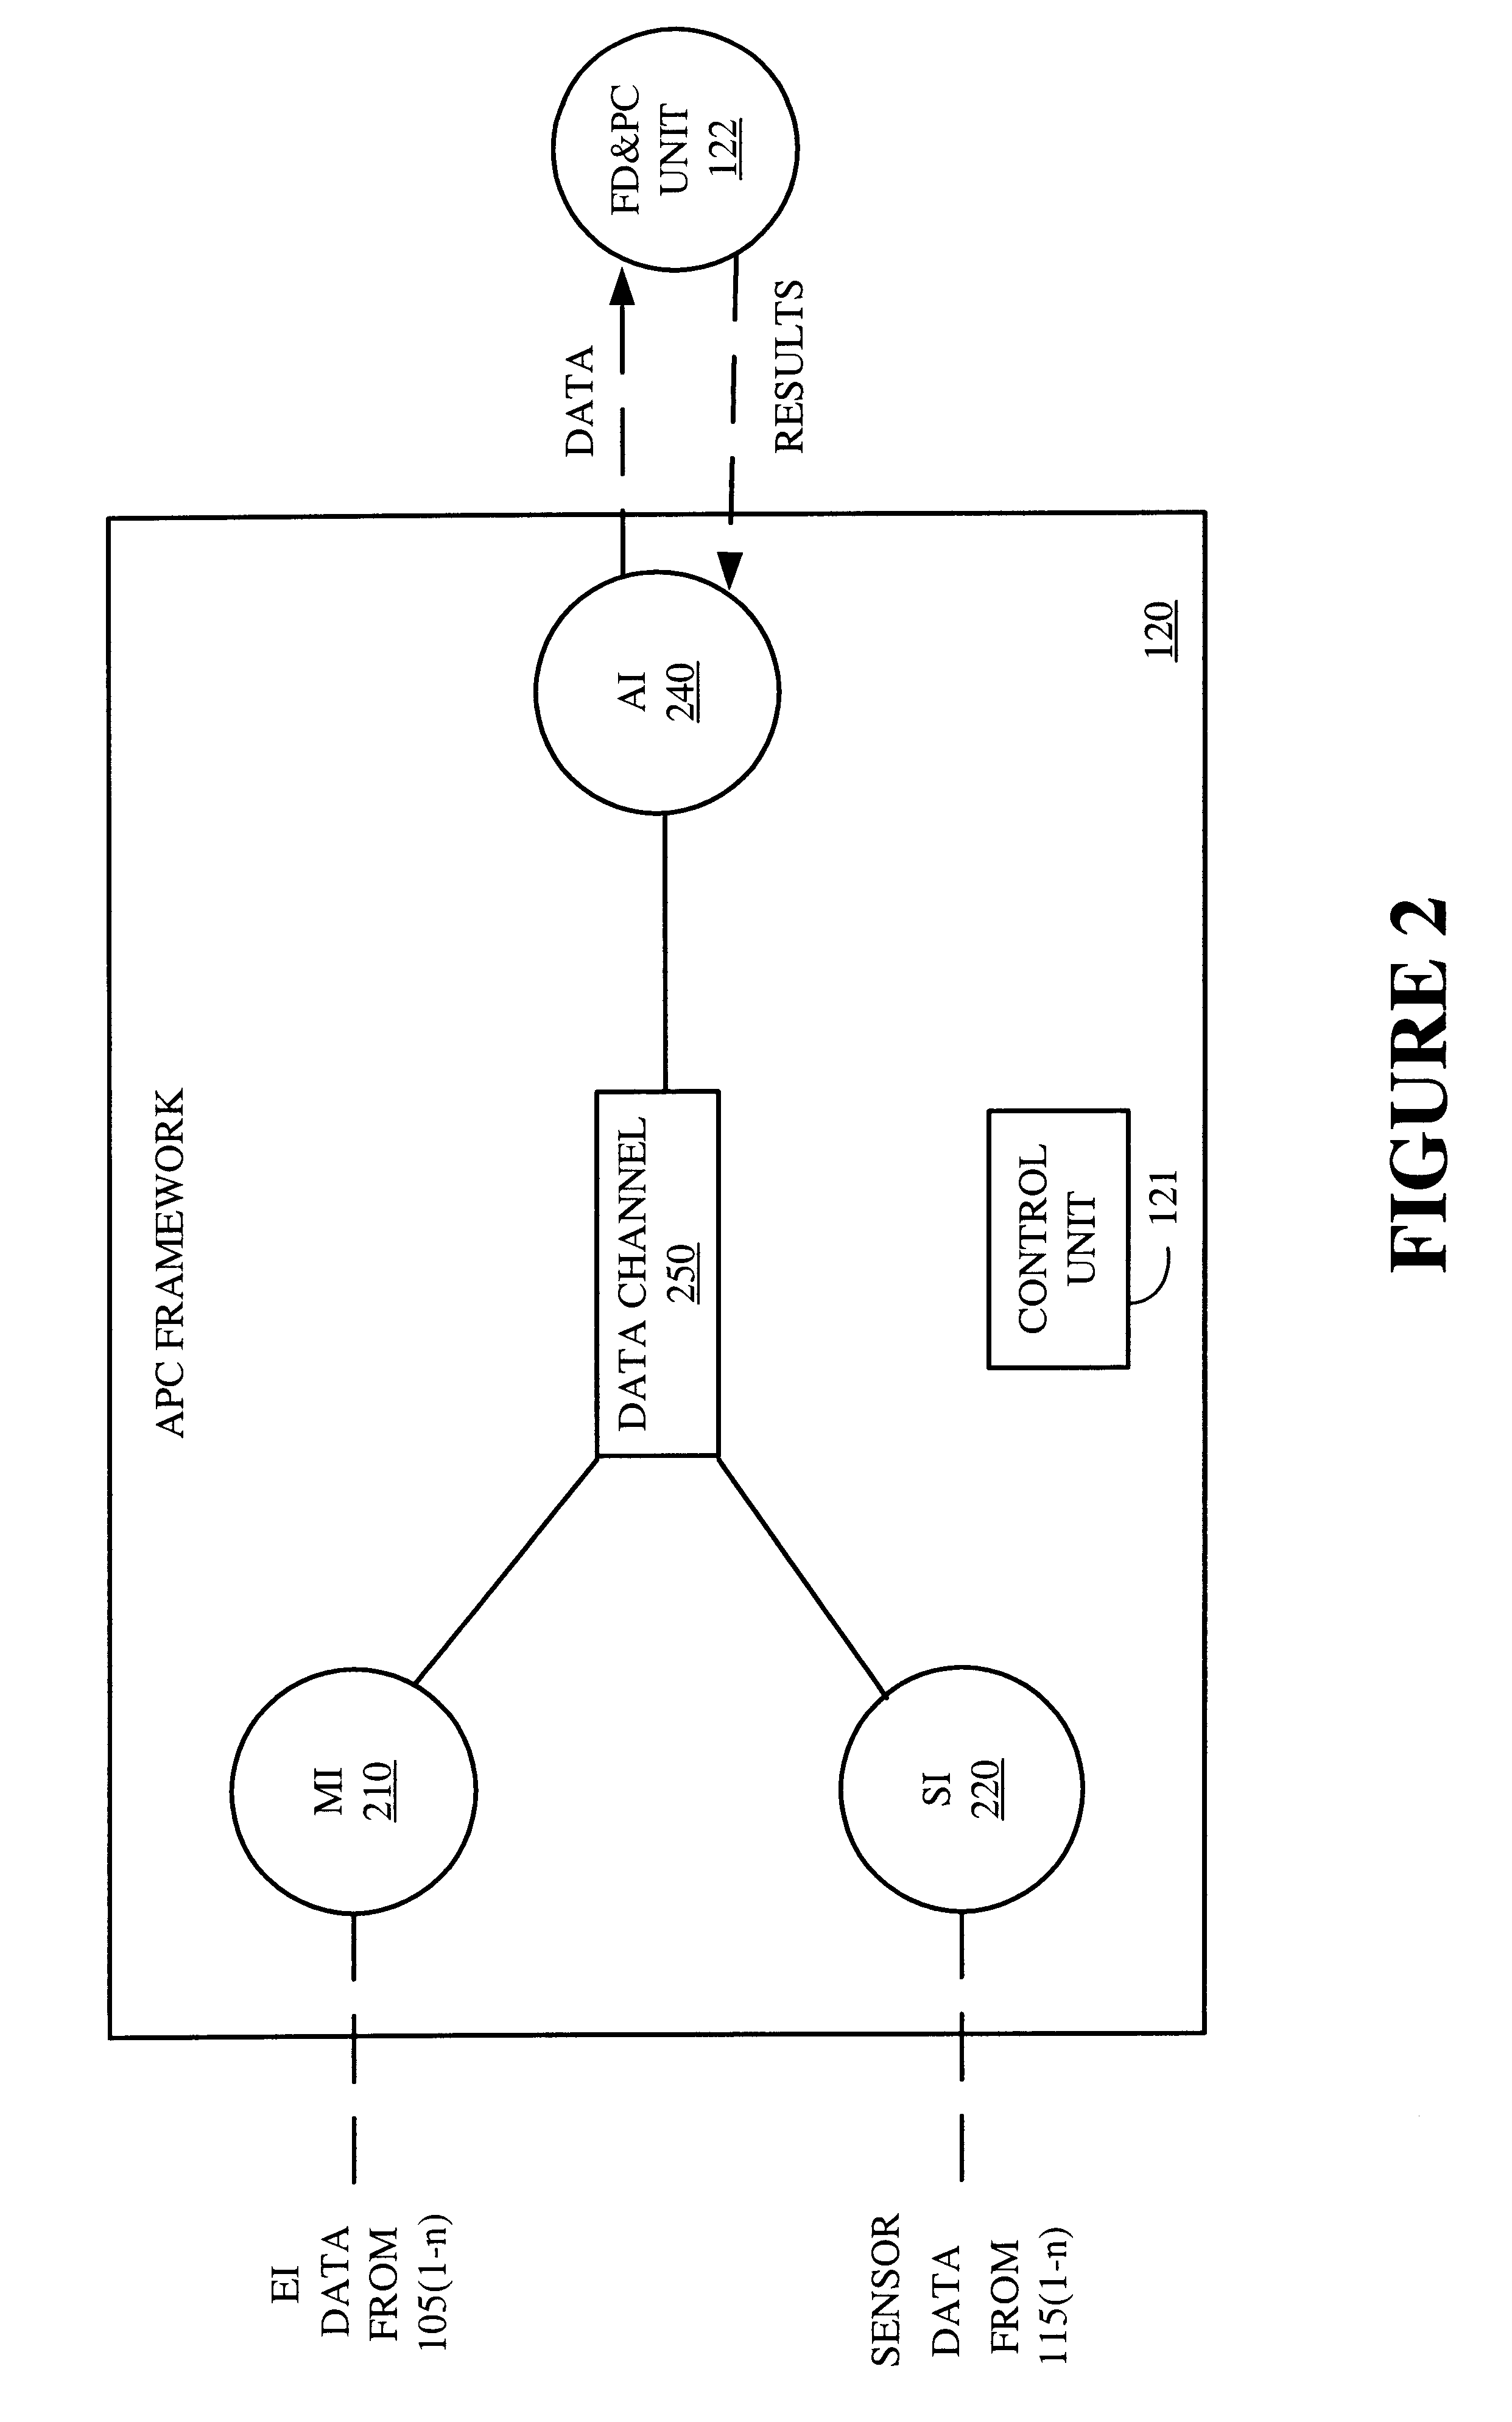 Operating a processing tool in a degraded mode upon detecting a fault